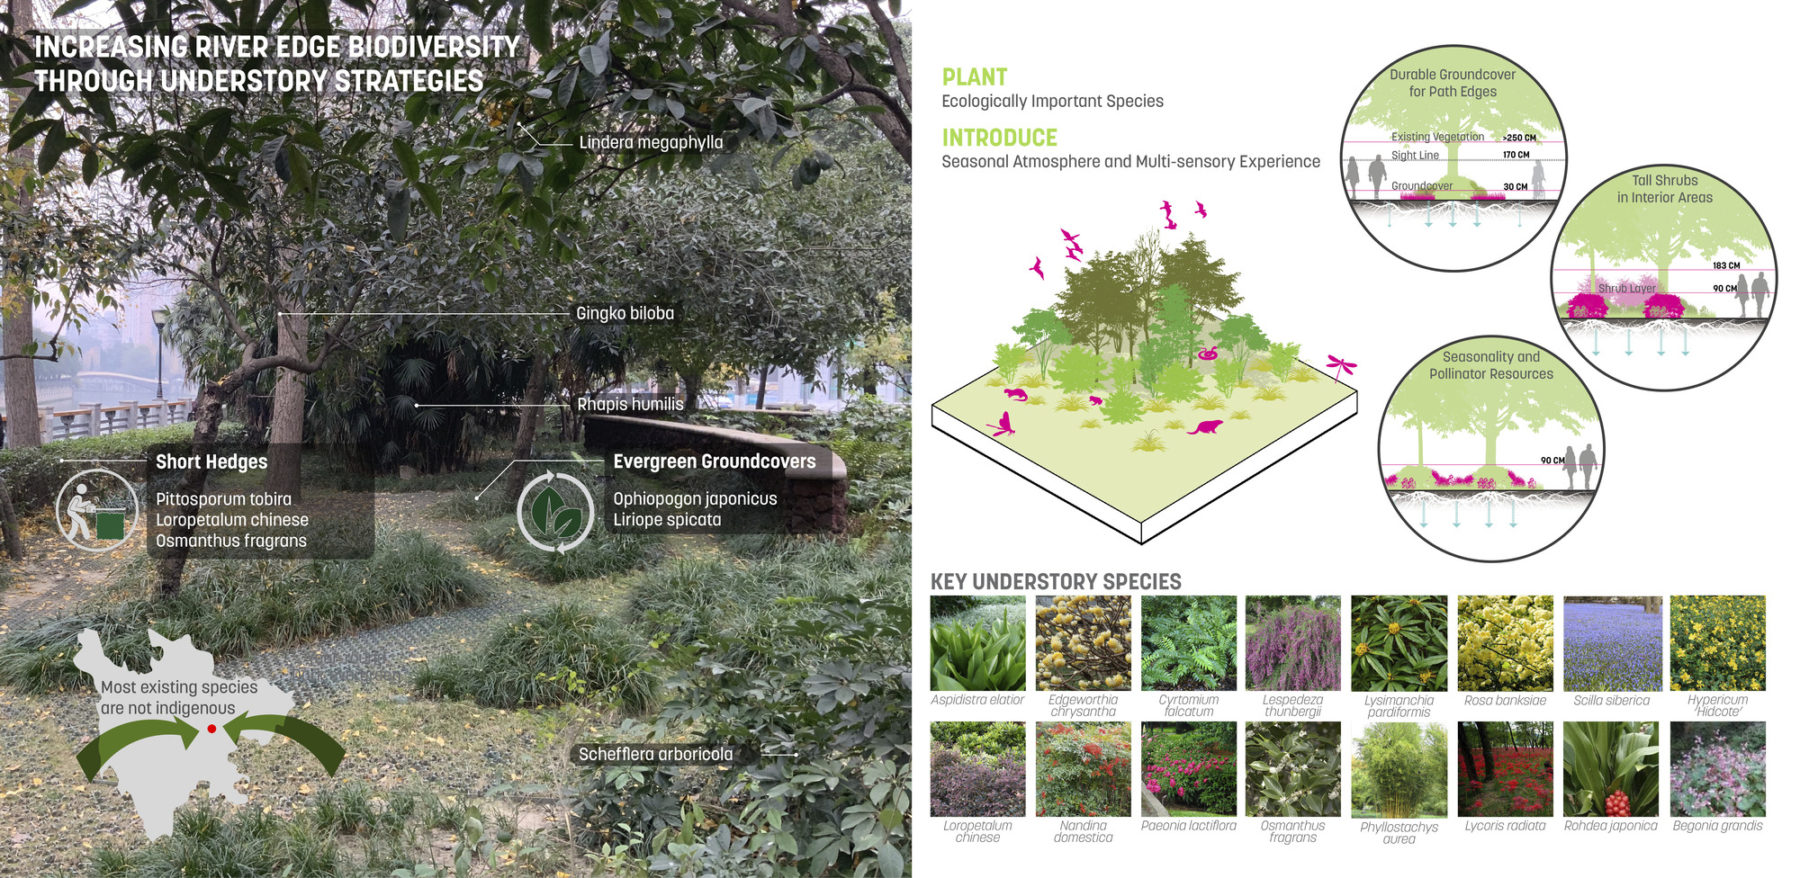 A composite image. The left side has a rendering overlaid with planting information (species, features, etc.). The right side has an axon drawing paired with section drawings and photos of understory species. Image title reads 